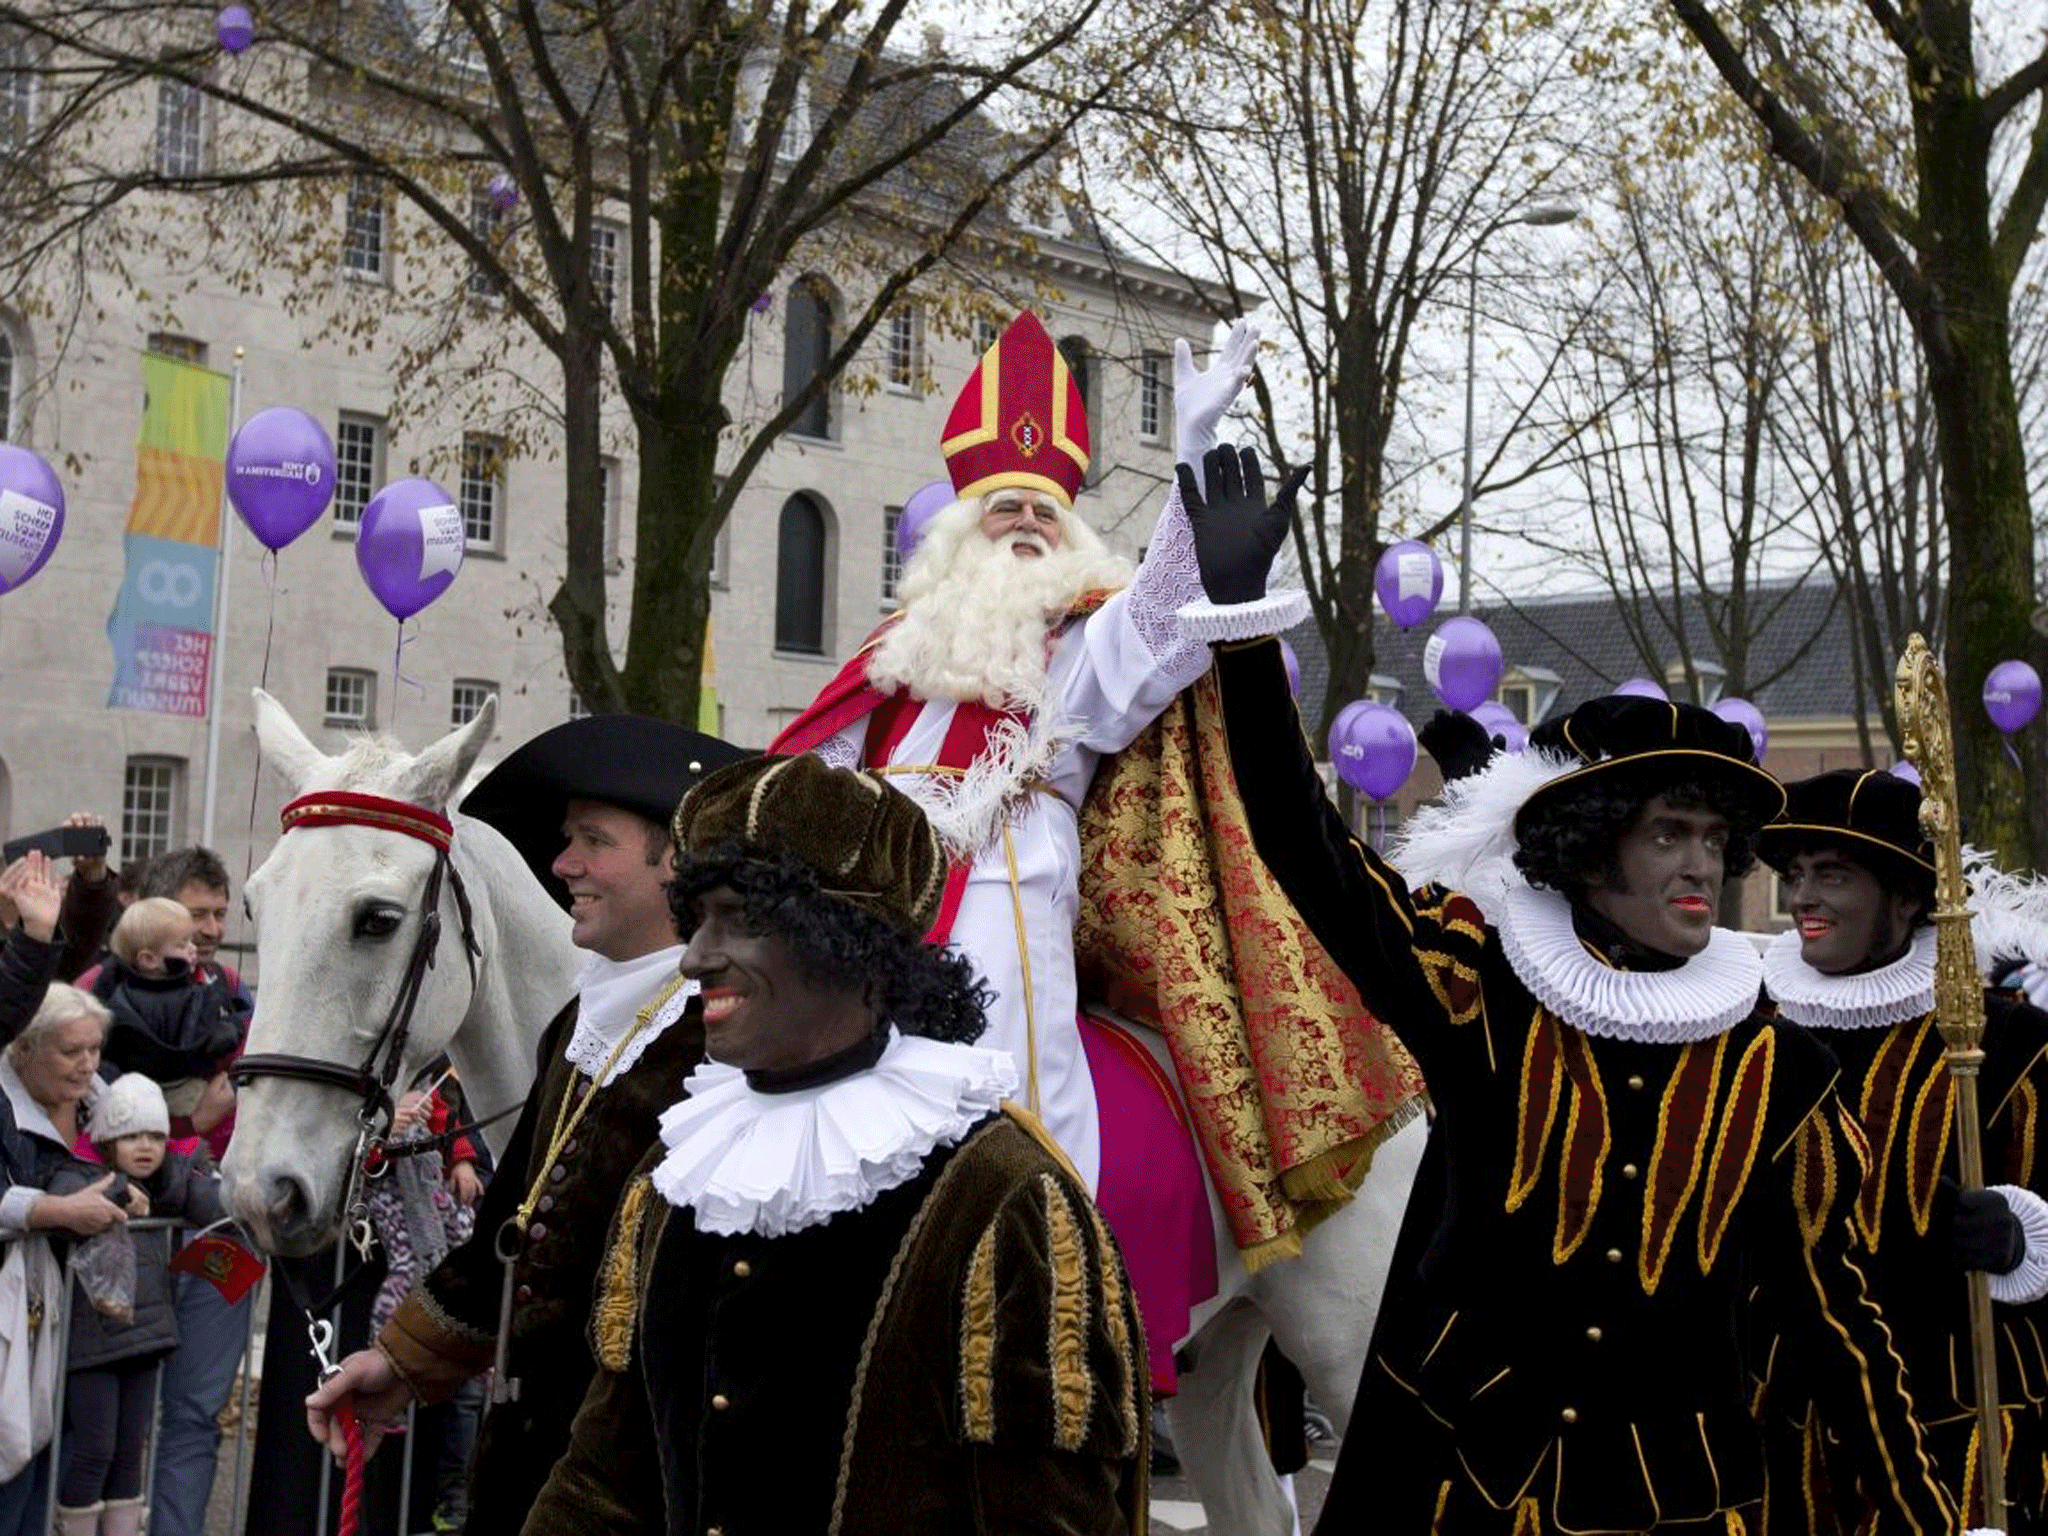 Black Pete is negative stereotype, Amsterdam court rules